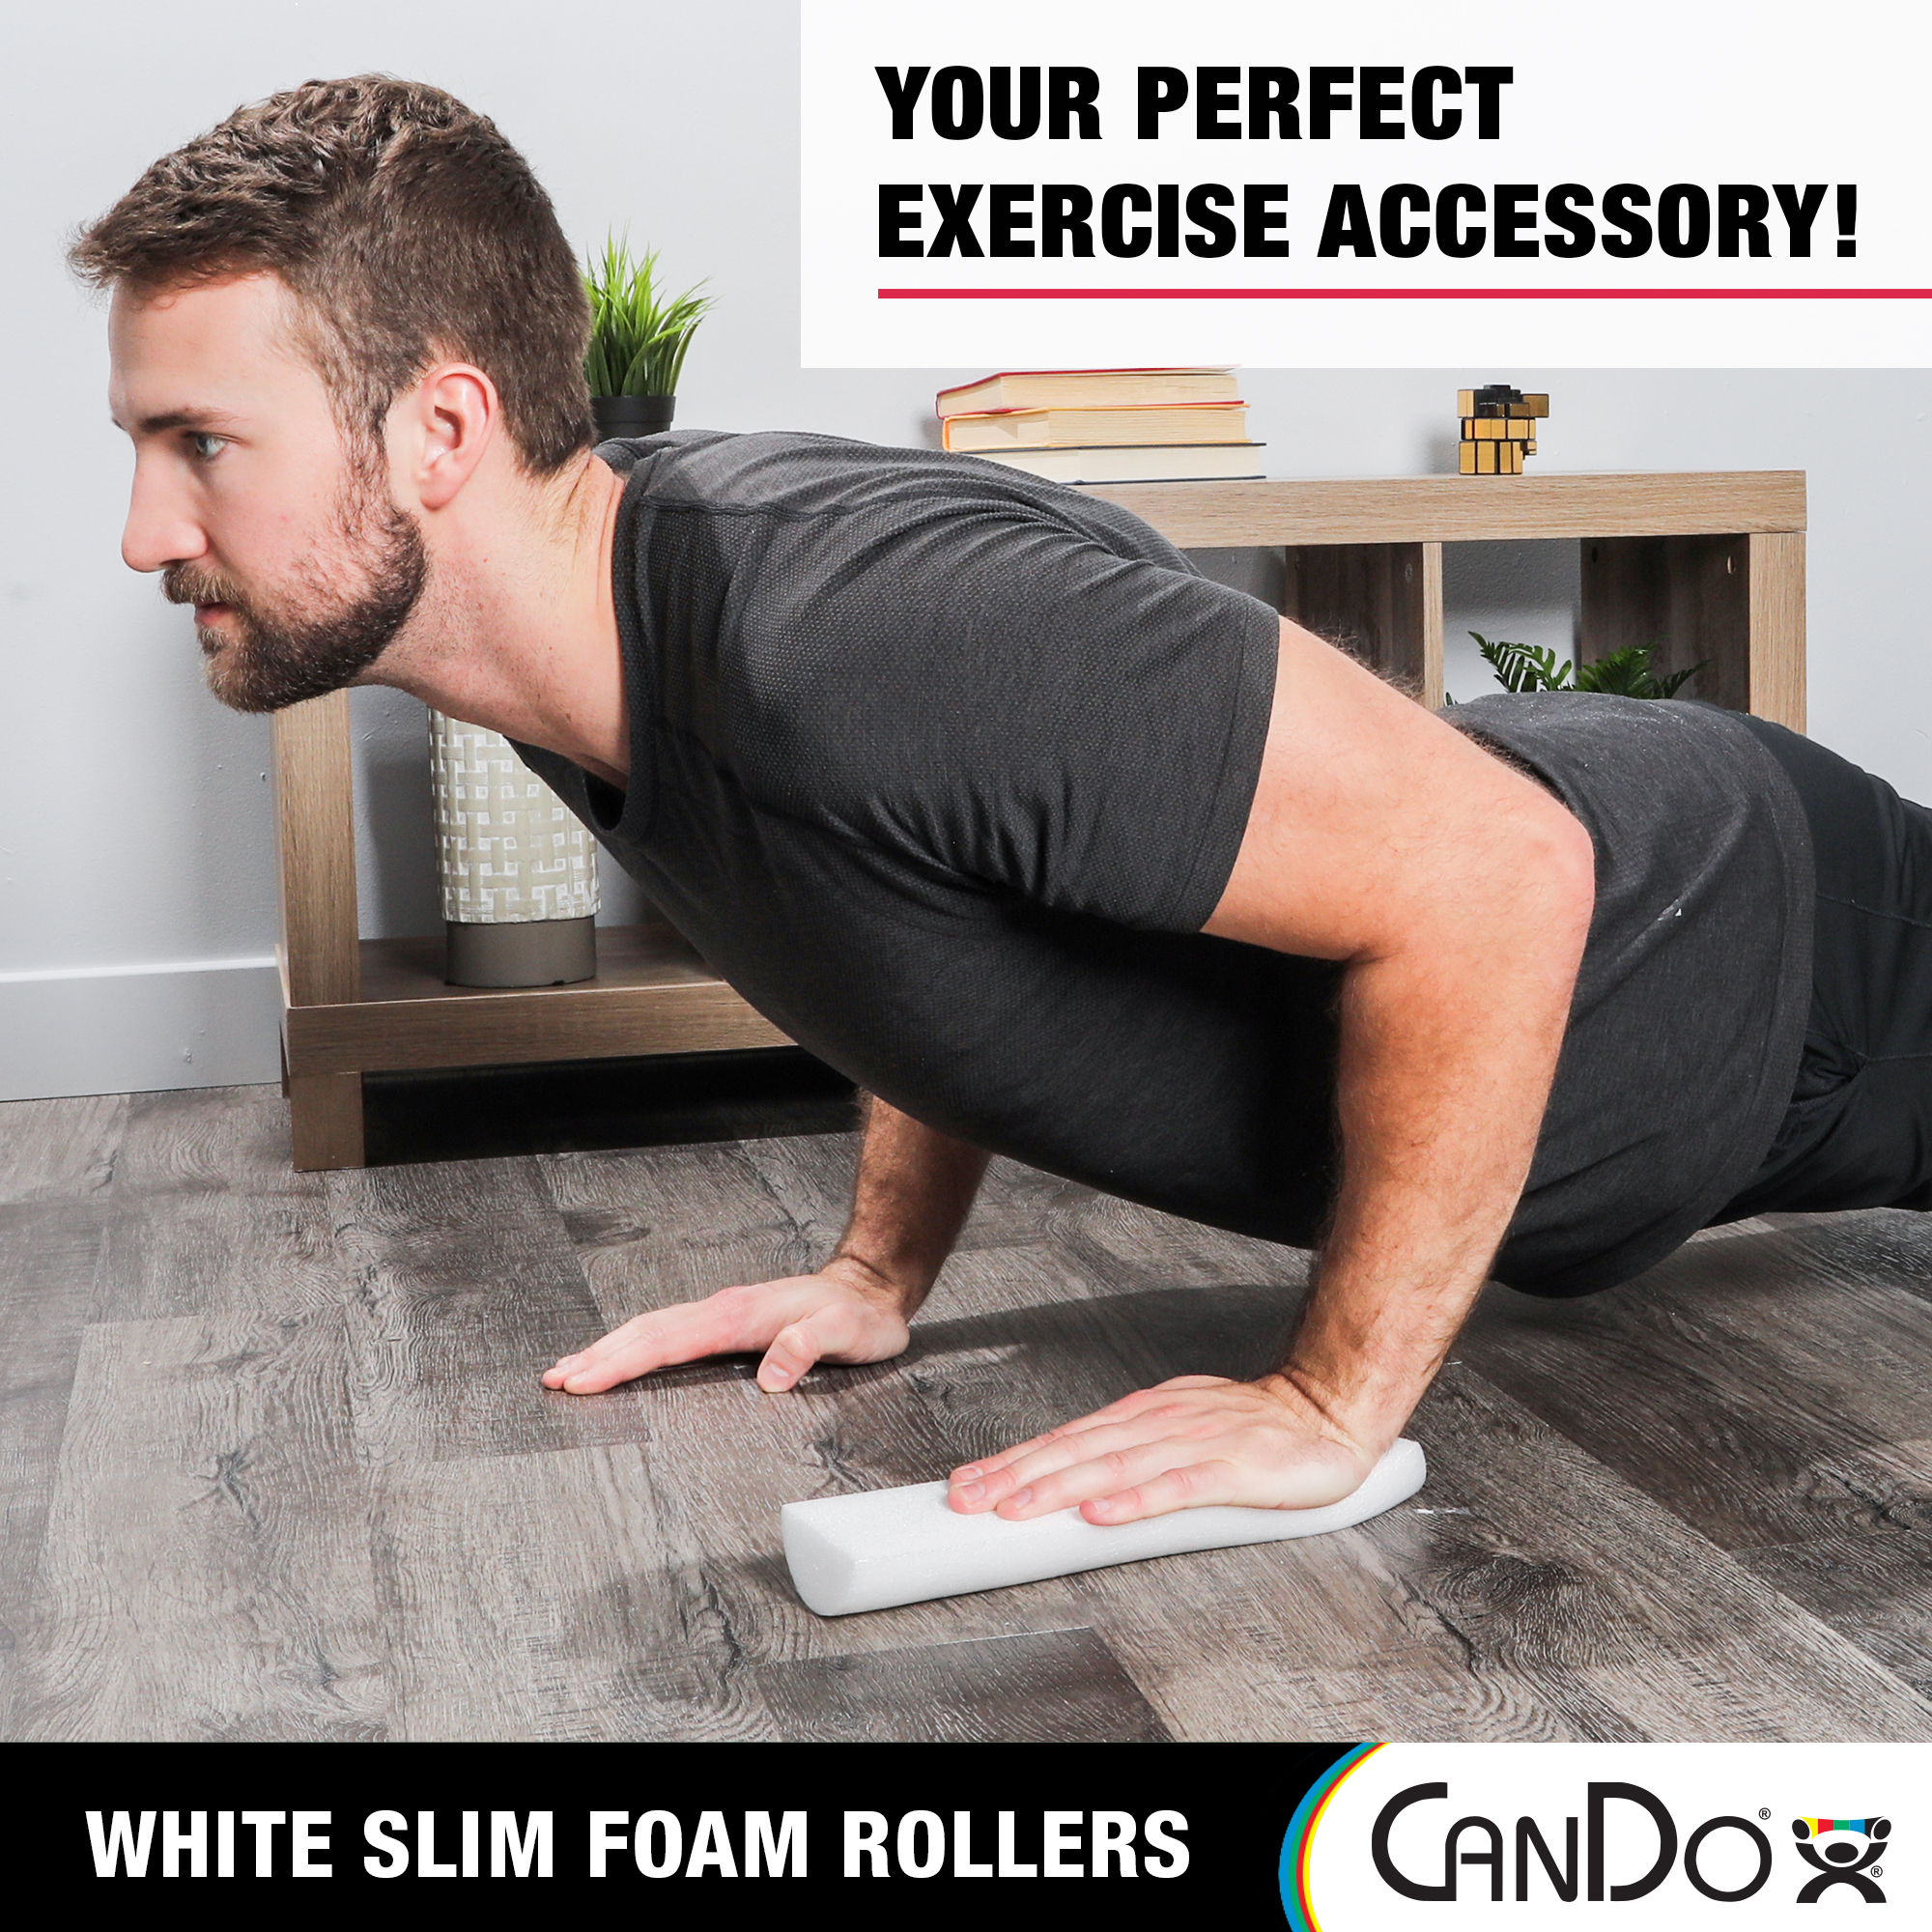 CanDo Slim White PE Foam Rollers for Exercise, Fitness, Muscle Restoration, Massage Therapy, Sport Recovery and Physical Therapy for Home, Clinics, Professional Therapy 3" x 36" Half-Round - image 3 of 6